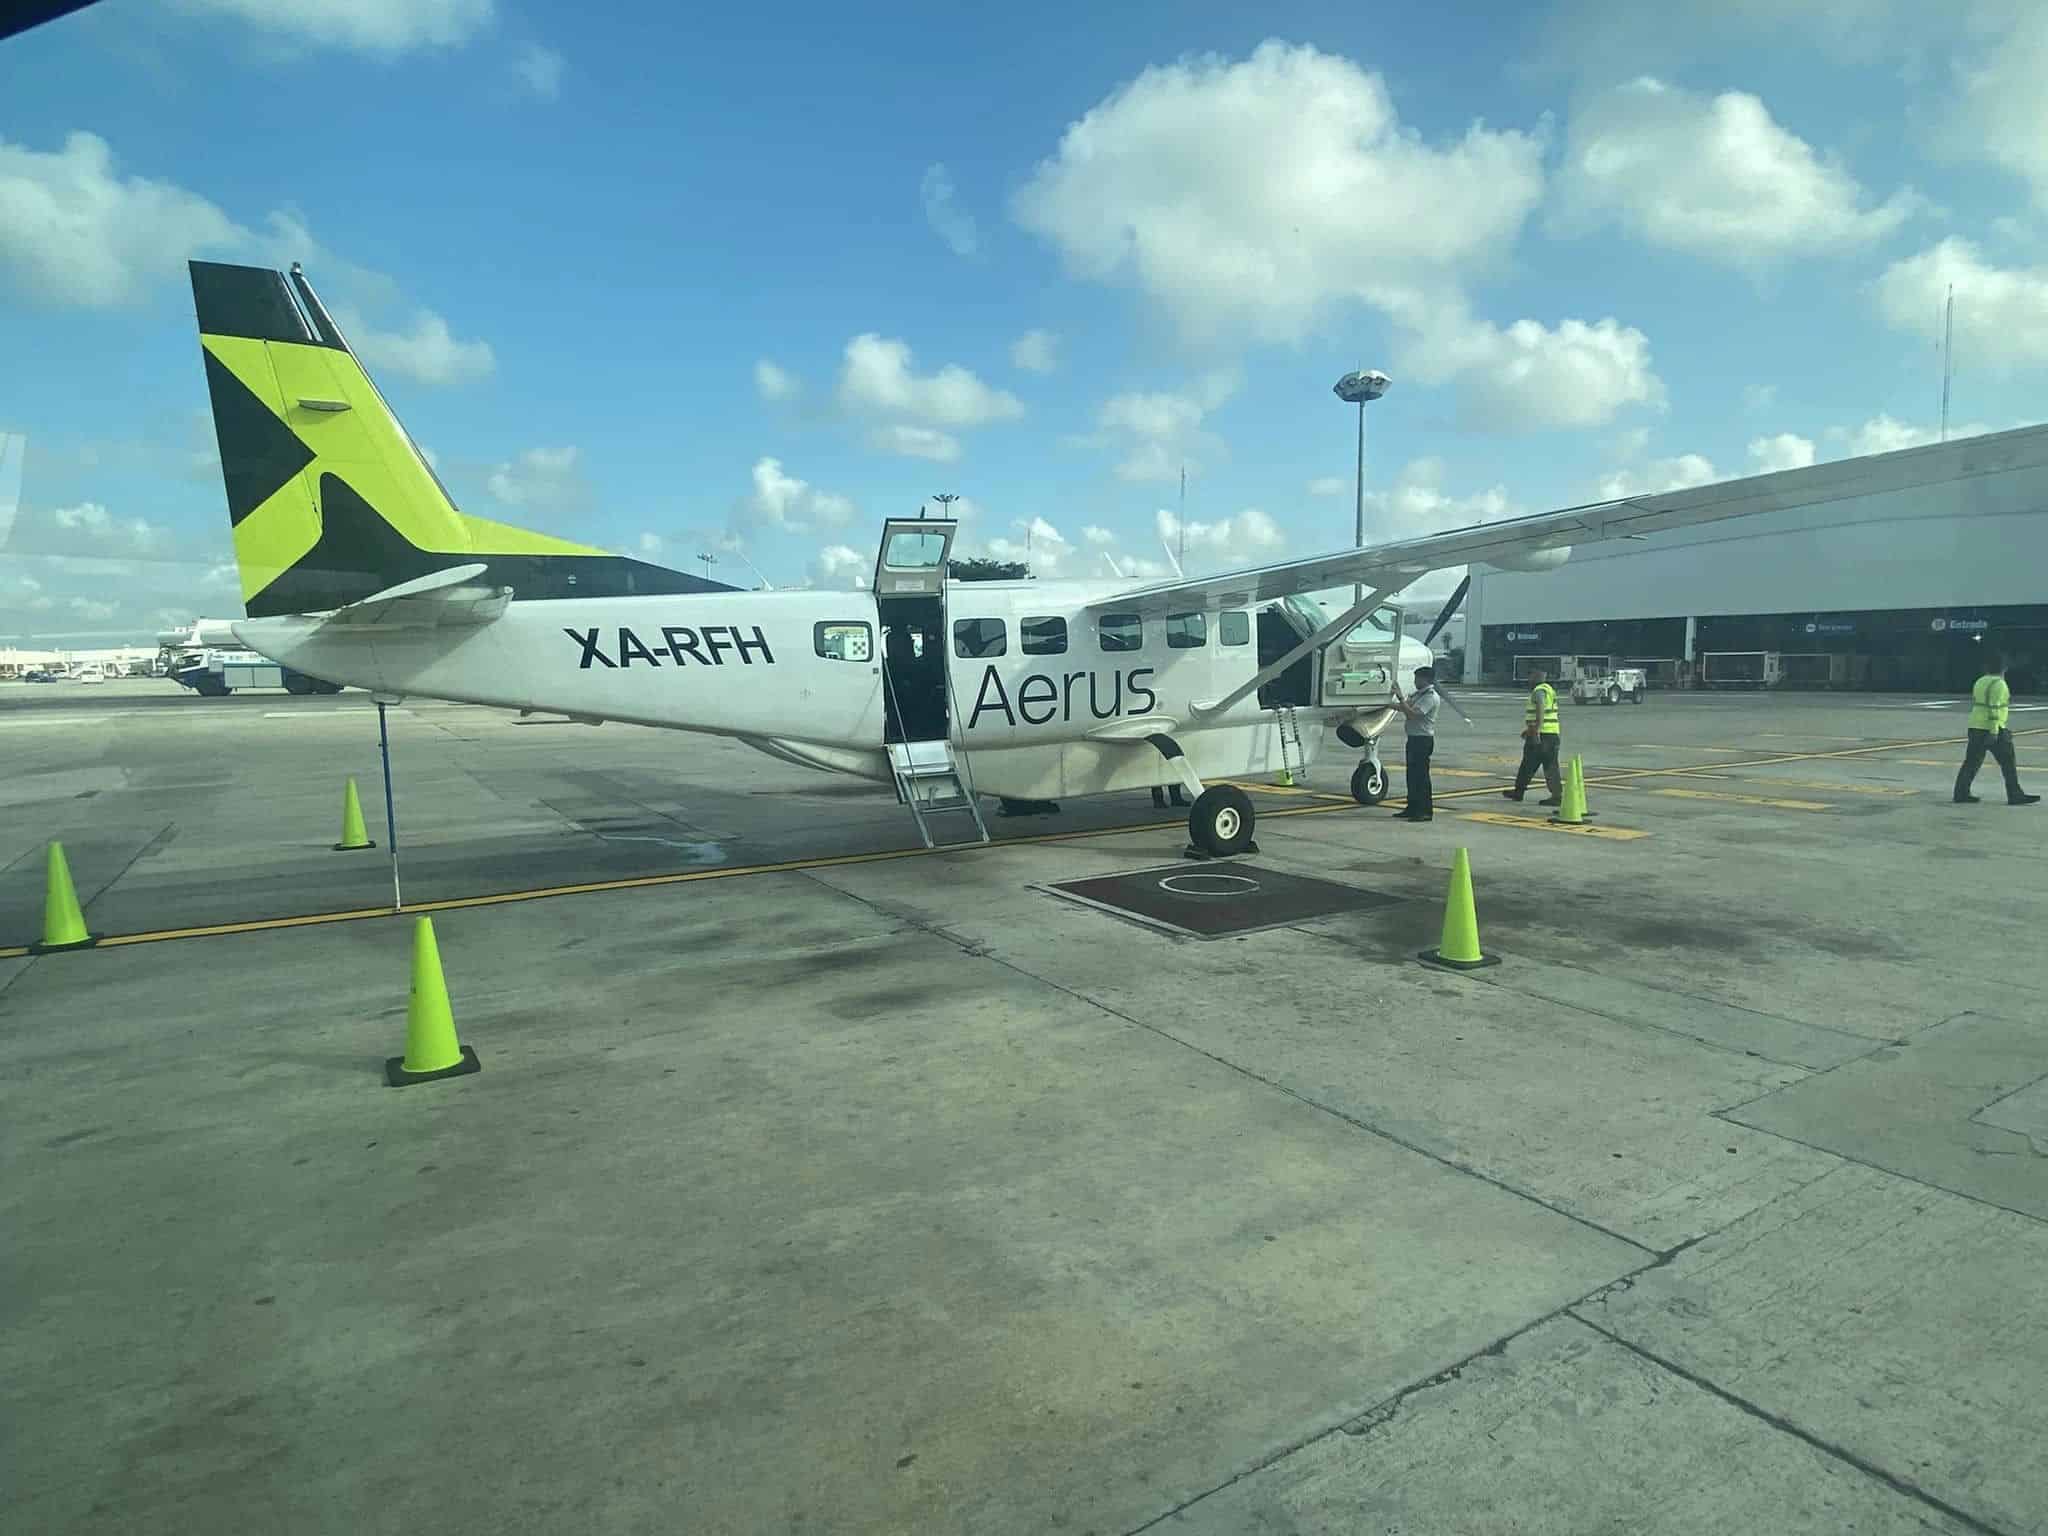 Aerus Airline From Cancun To Cozumel